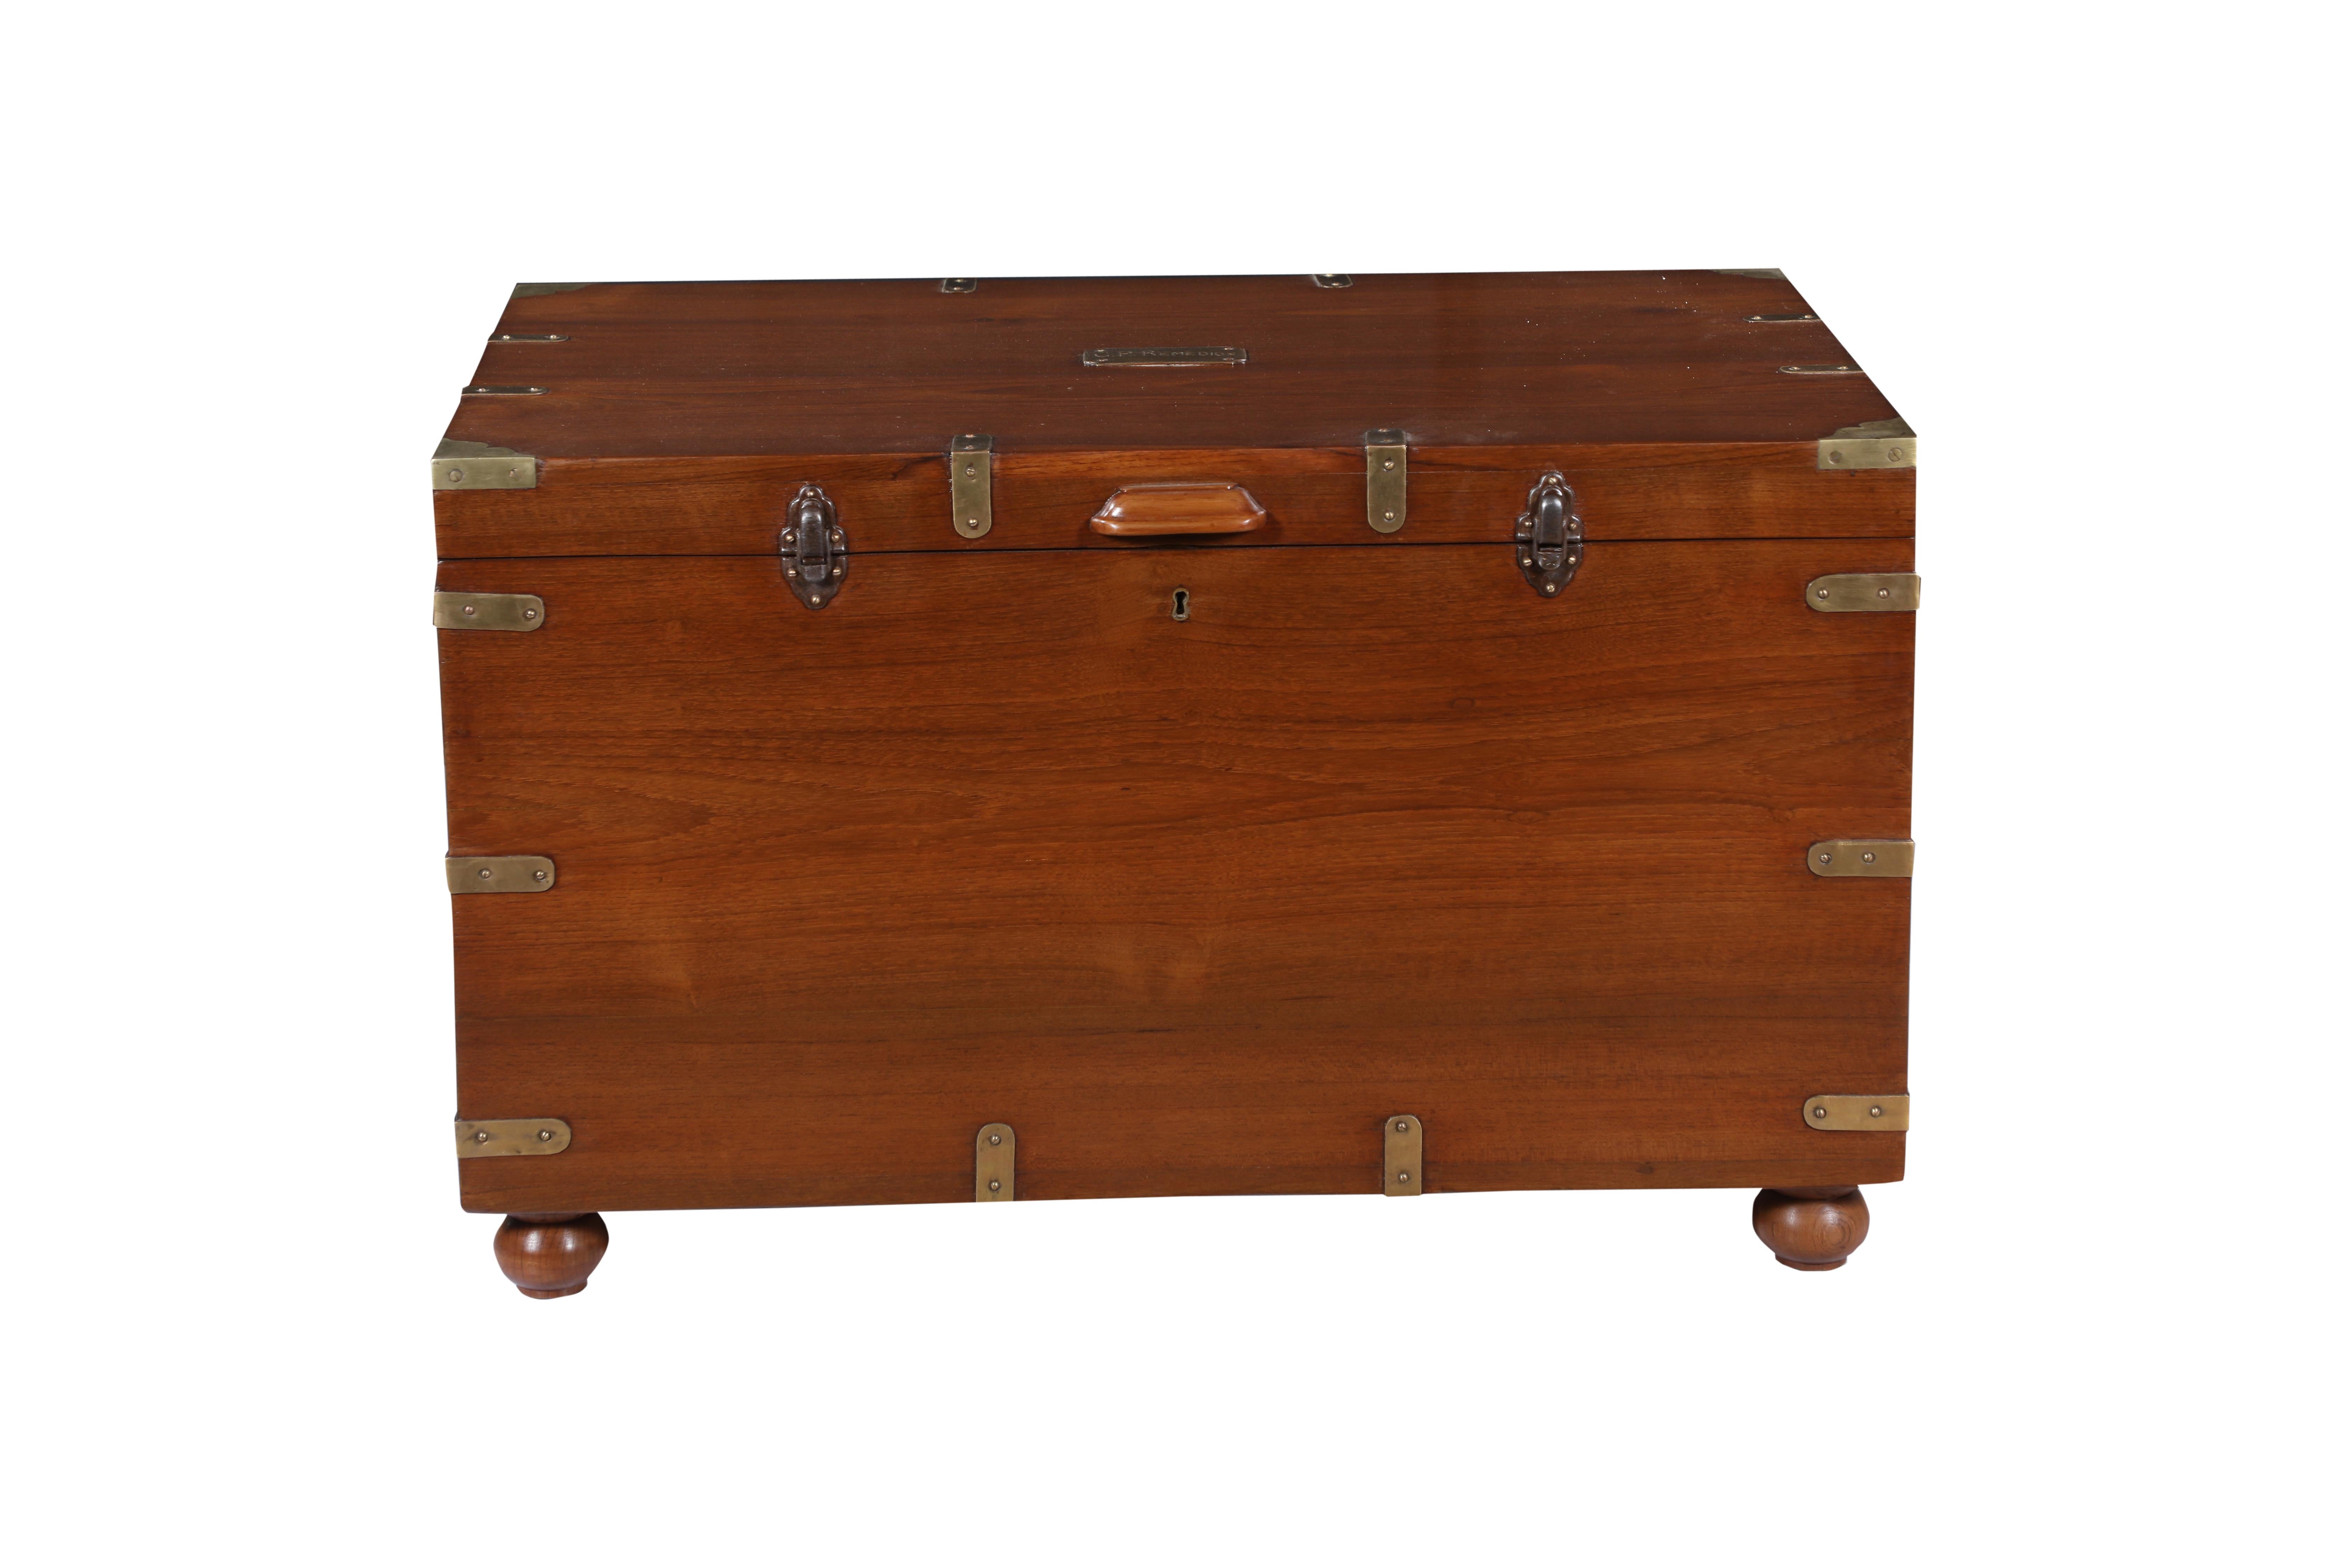 A handsome British Campaign teak blanket chest or trunk which could also be used as a coffee table. Brass straps on corners, bun feet and iron latches and handles. The interior has a tray with compartments that can lift out for further storage